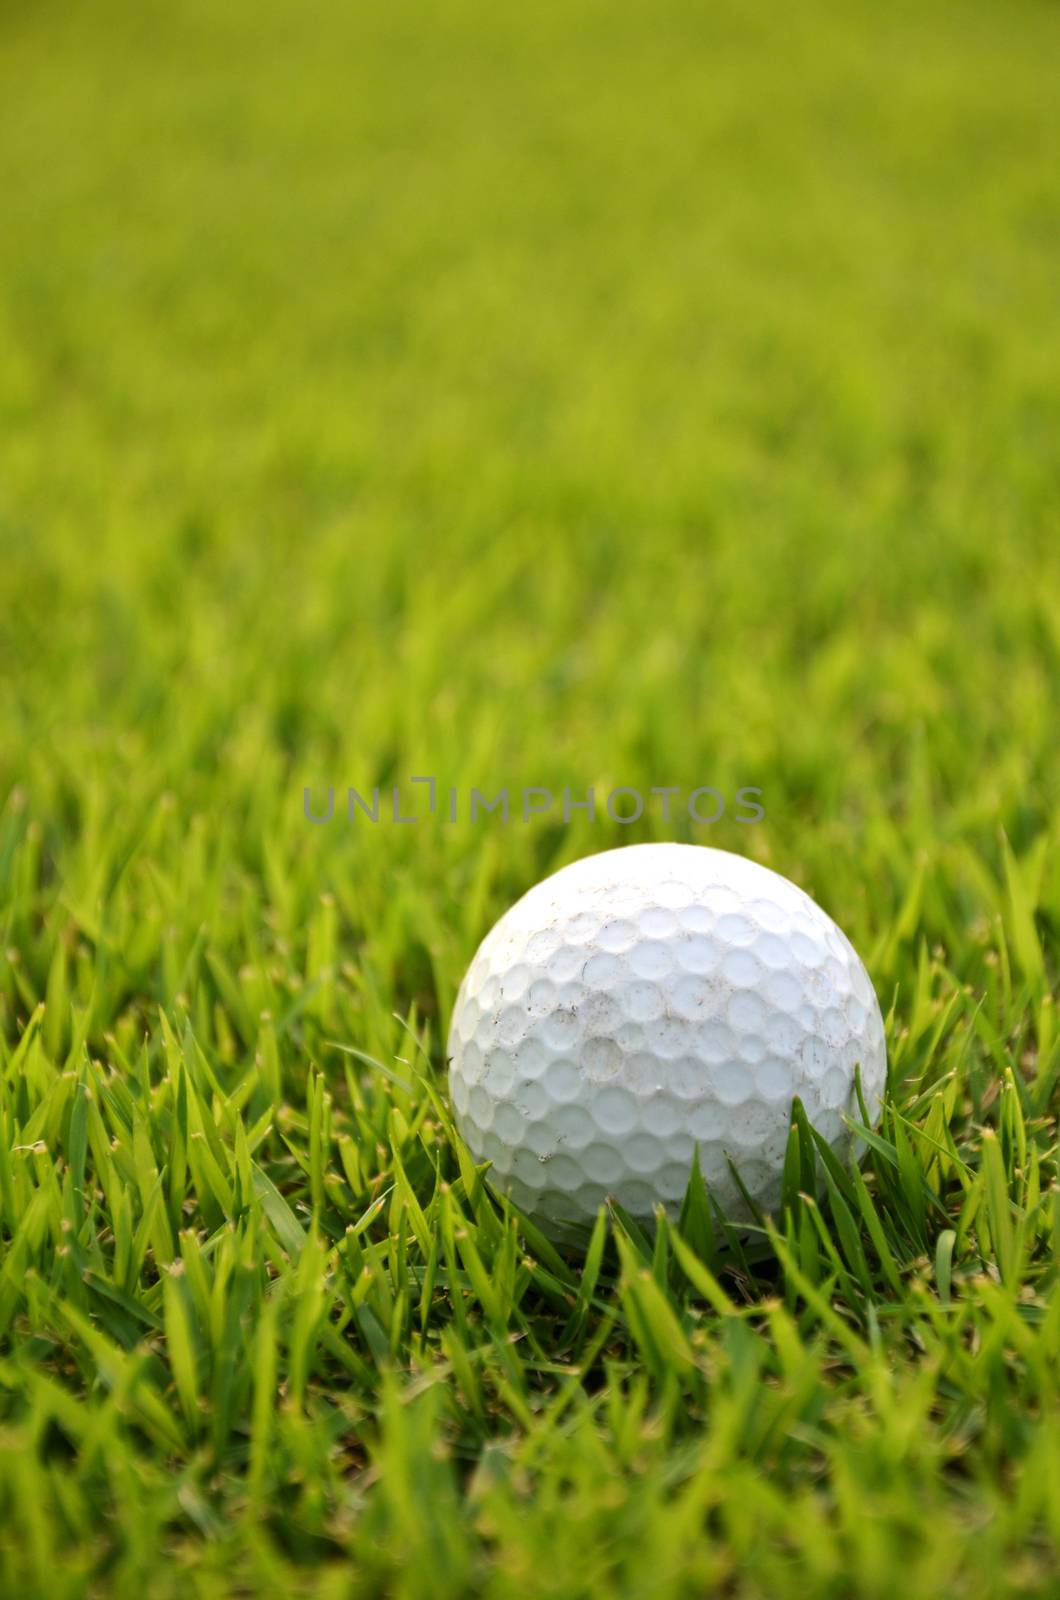 Dirty golf ball on the grass with green background